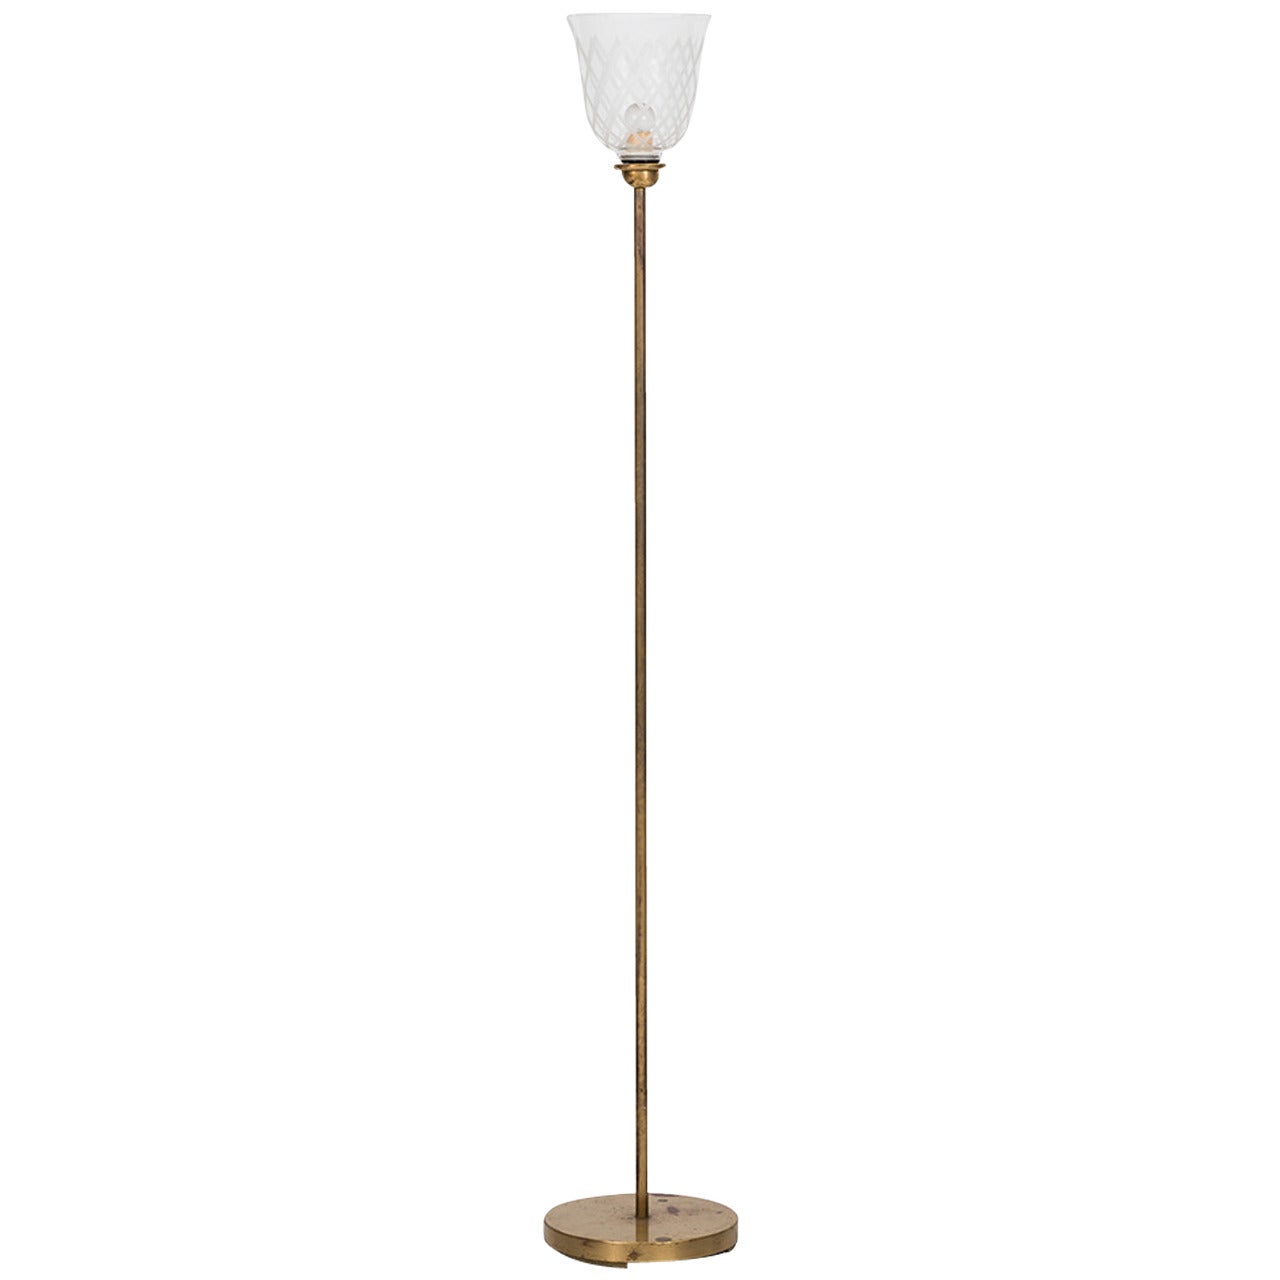 Bo Notini floor lamp in brass and etched glass by Glössner & Co in Sweden